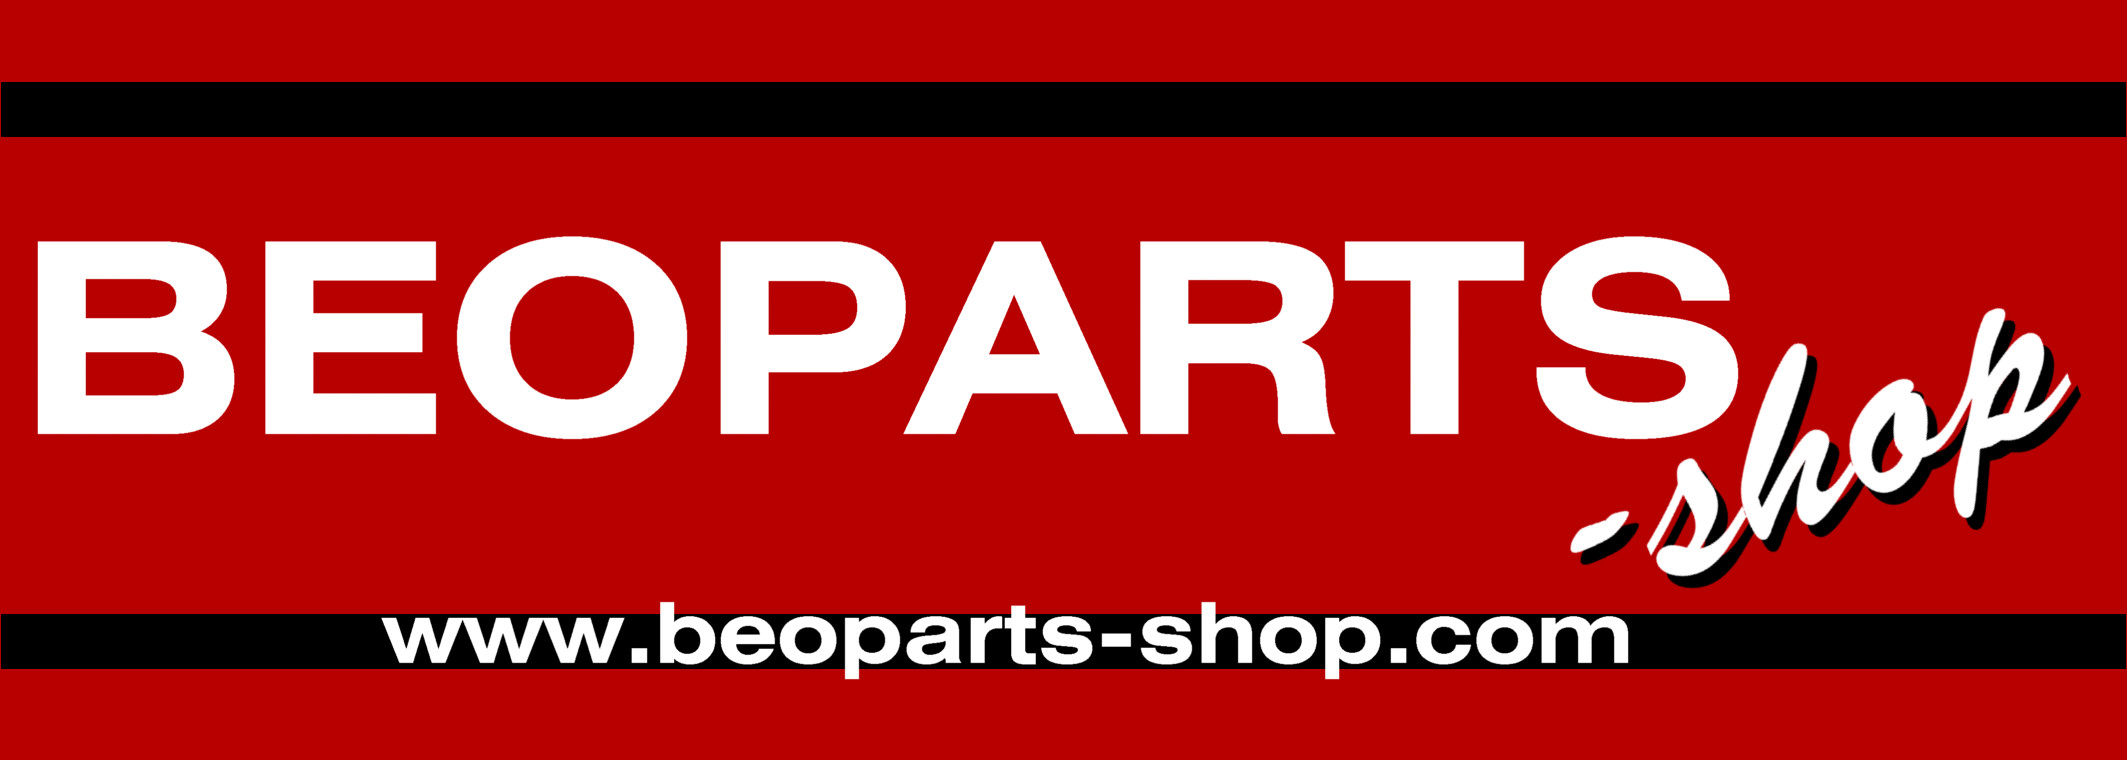 Beoparts shop